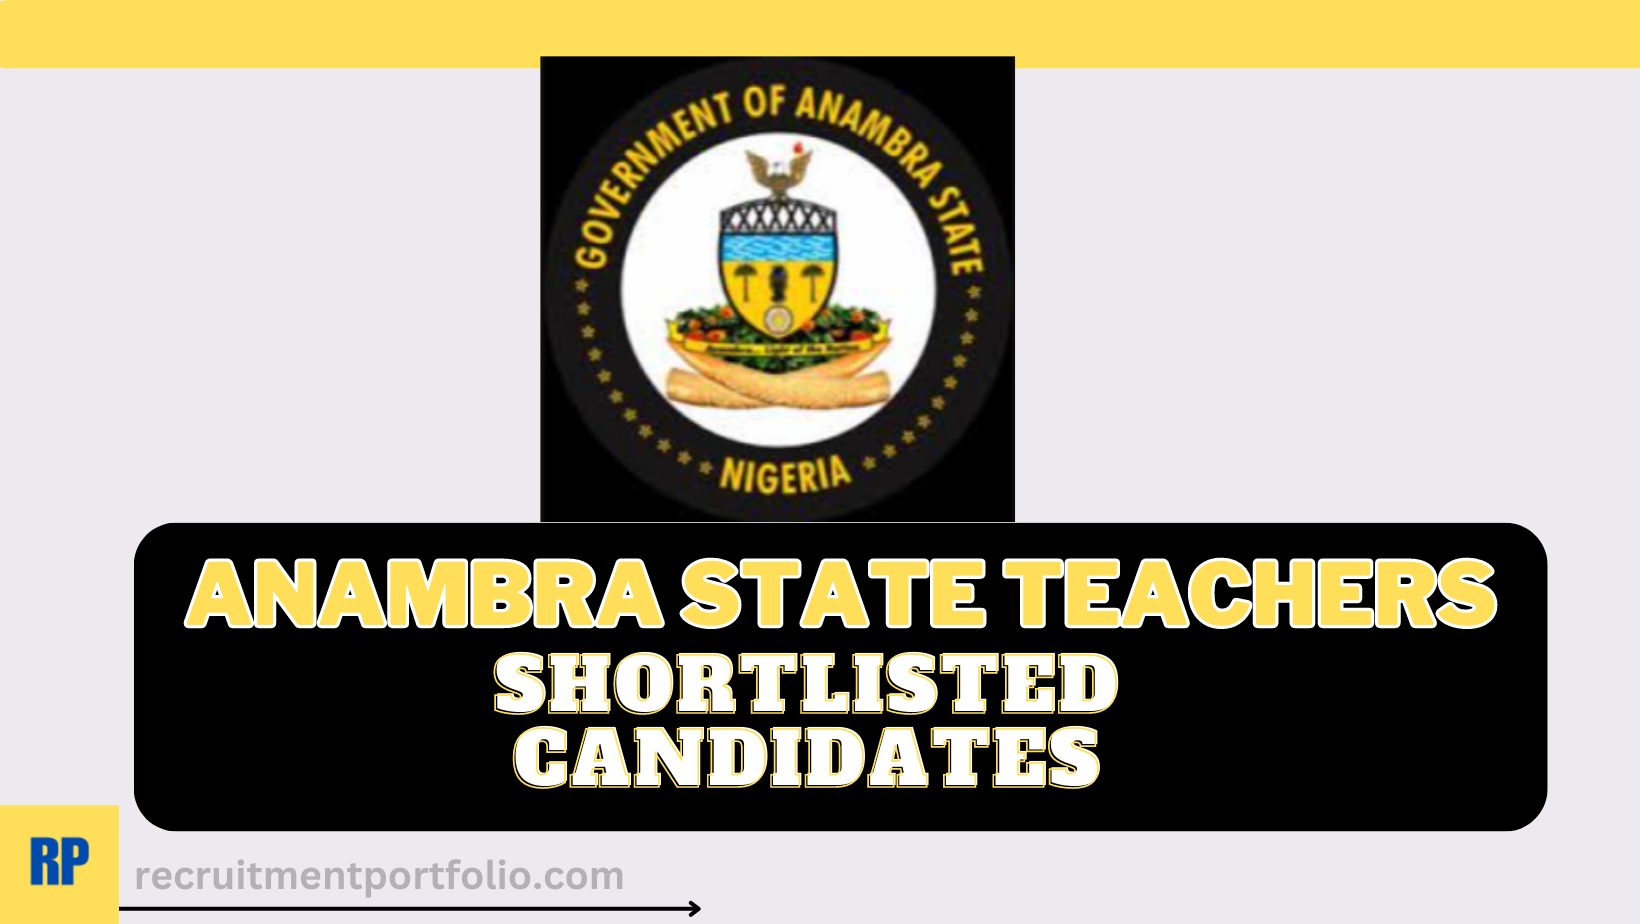 Anambra State Teachers Shortlisted Candidates